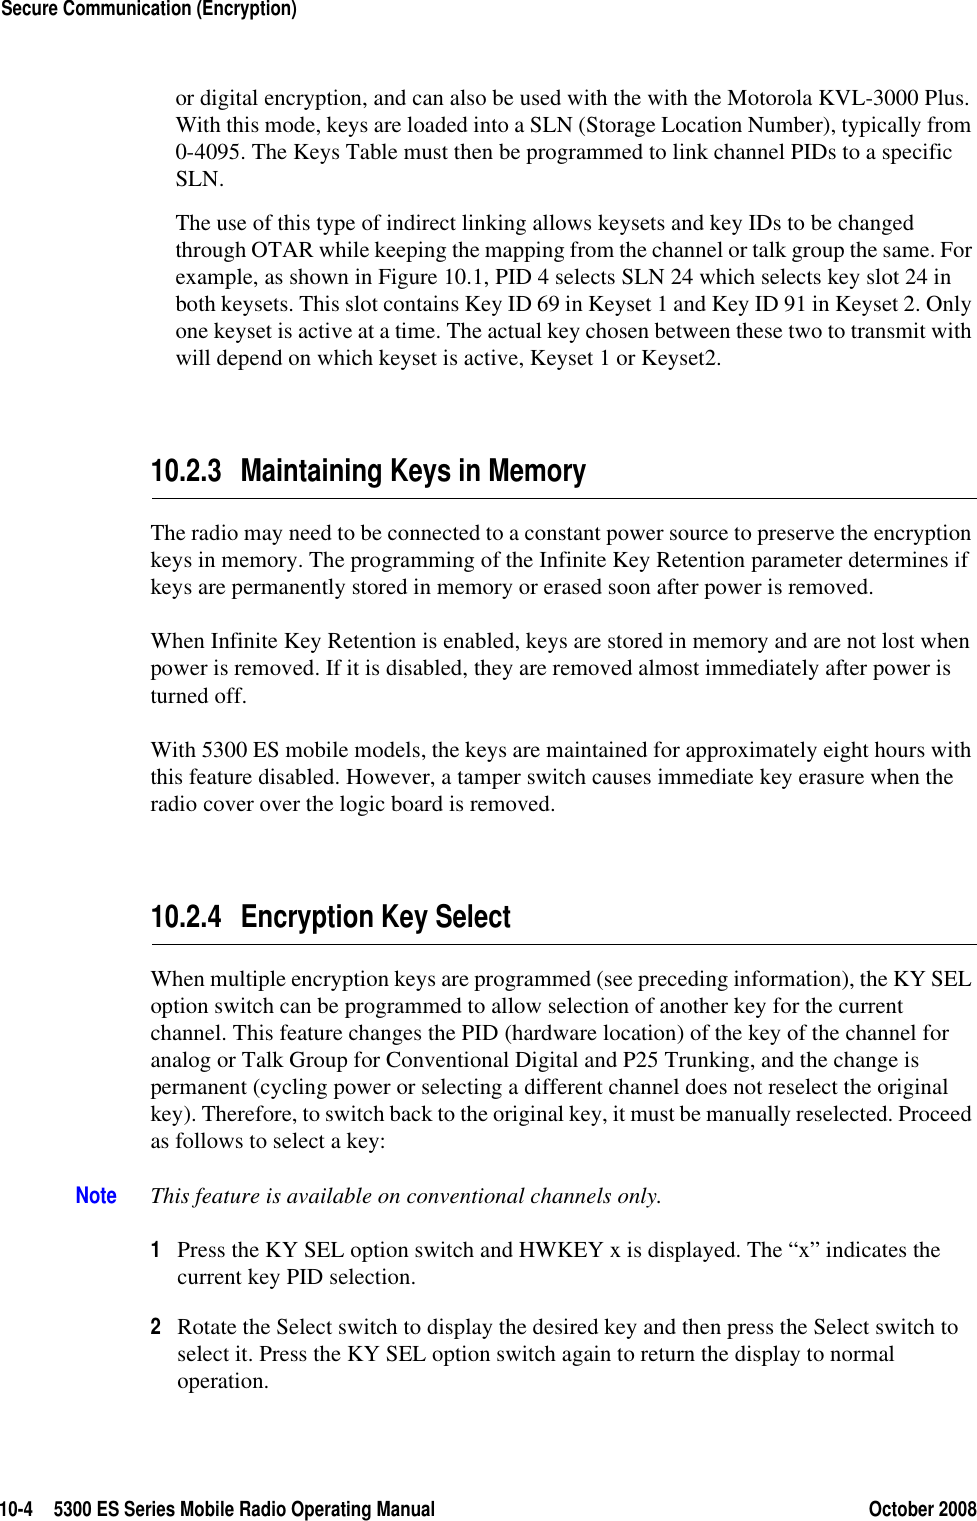 10-4 5300 ES Series Mobile Radio Operating Manual October 2008Secure Communication (Encryption)or digital encryption, and can also be used with the with the Motorola KVL-3000 Plus. With this mode, keys are loaded into a SLN (Storage Location Number), typically from 0-4095. The Keys Table must then be programmed to link channel PIDs to a specific SLN.The use of this type of indirect linking allows keysets and key IDs to be changed through OTAR while keeping the mapping from the channel or talk group the same. For example, as shown in Figure 10.1, PID 4 selects SLN 24 which selects key slot 24 in both keysets. This slot contains Key ID 69 in Keyset 1 and Key ID 91 in Keyset 2. Only one keyset is active at a time. The actual key chosen between these two to transmit with will depend on which keyset is active, Keyset 1 or Keyset2.10.2.3 Maintaining Keys in MemoryThe radio may need to be connected to a constant power source to preserve the encryption keys in memory. The programming of the Infinite Key Retention parameter determines if keys are permanently stored in memory or erased soon after power is removed.When Infinite Key Retention is enabled, keys are stored in memory and are not lost when power is removed. If it is disabled, they are removed almost immediately after power is turned off.With 5300 ES mobile models, the keys are maintained for approximately eight hours with this feature disabled. However, a tamper switch causes immediate key erasure when the radio cover over the logic board is removed.10.2.4 Encryption Key SelectWhen multiple encryption keys are programmed (see preceding information), the KY SEL option switch can be programmed to allow selection of another key for the current channel. This feature changes the PID (hardware location) of the key of the channel for analog or Talk Group for Conventional Digital and P25 Trunking, and the change is permanent (cycling power or selecting a different channel does not reselect the original key). Therefore, to switch back to the original key, it must be manually reselected. Proceed as follows to select a key:Note This feature is available on conventional channels only.1Press the KY SEL option switch and HWKEY x is displayed. The “x” indicates the current key PID selection.2Rotate the Select switch to display the desired key and then press the Select switch to select it. Press the KY SEL option switch again to return the display to normal operation.